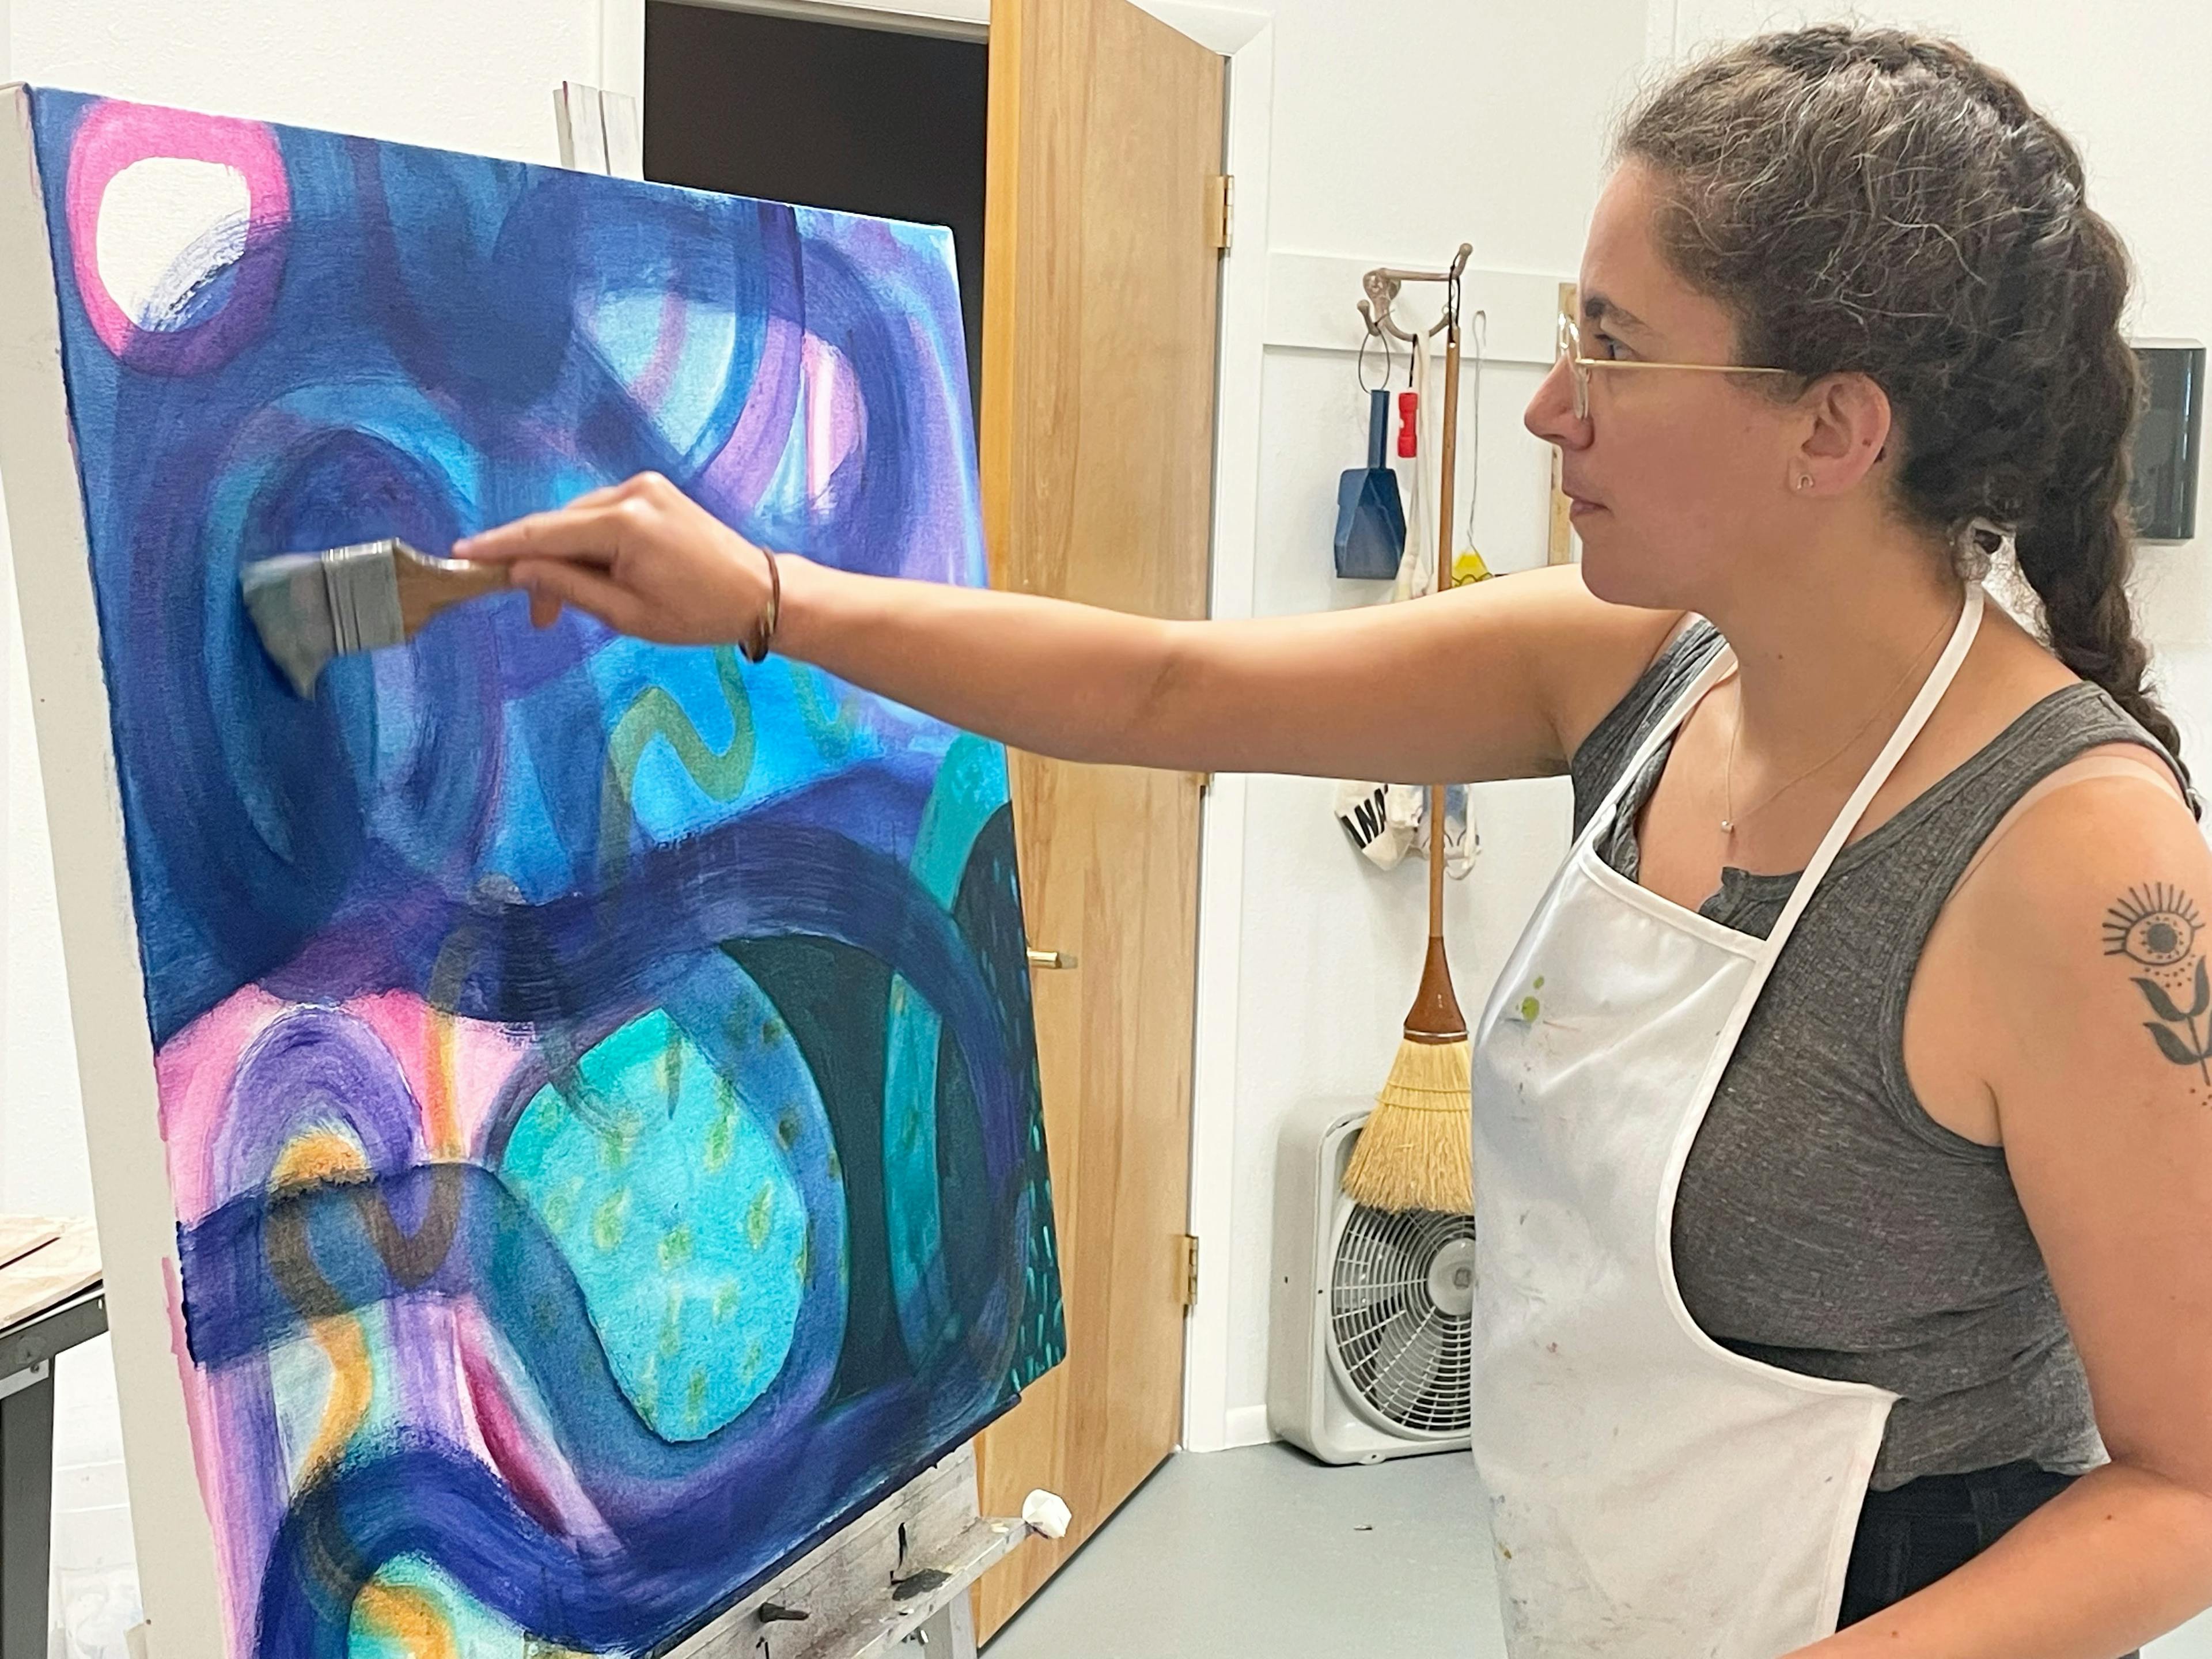 Artist Aliza Cohen wearing an apron and painting dark blue swaths of paint on a canvas in her studio.